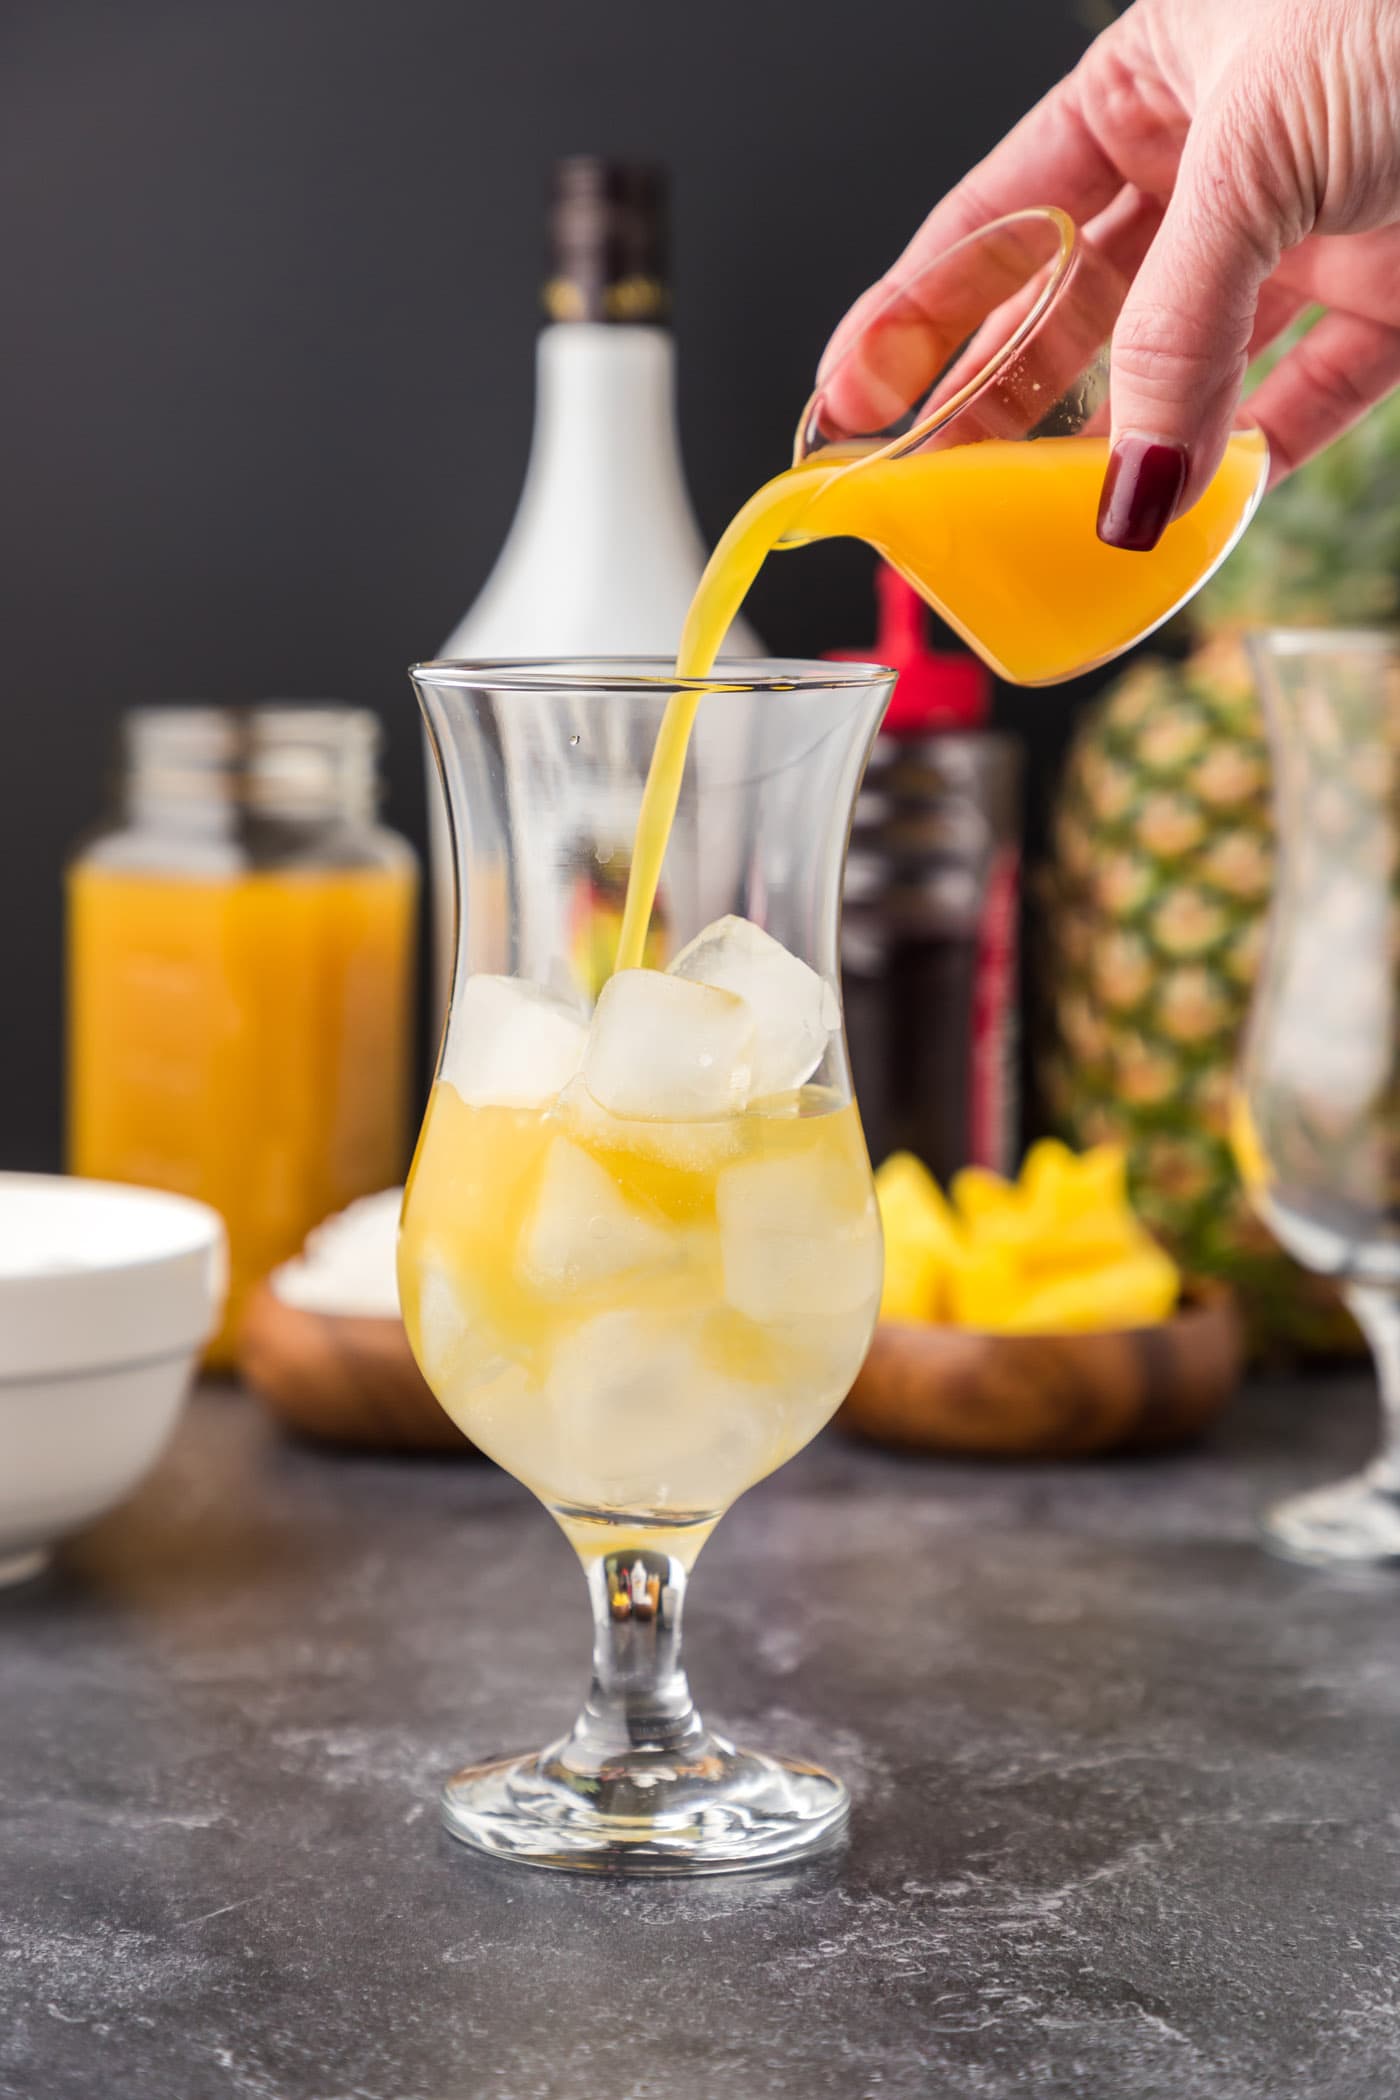 pouring pineapple juice into glass of Malibu rum and ice